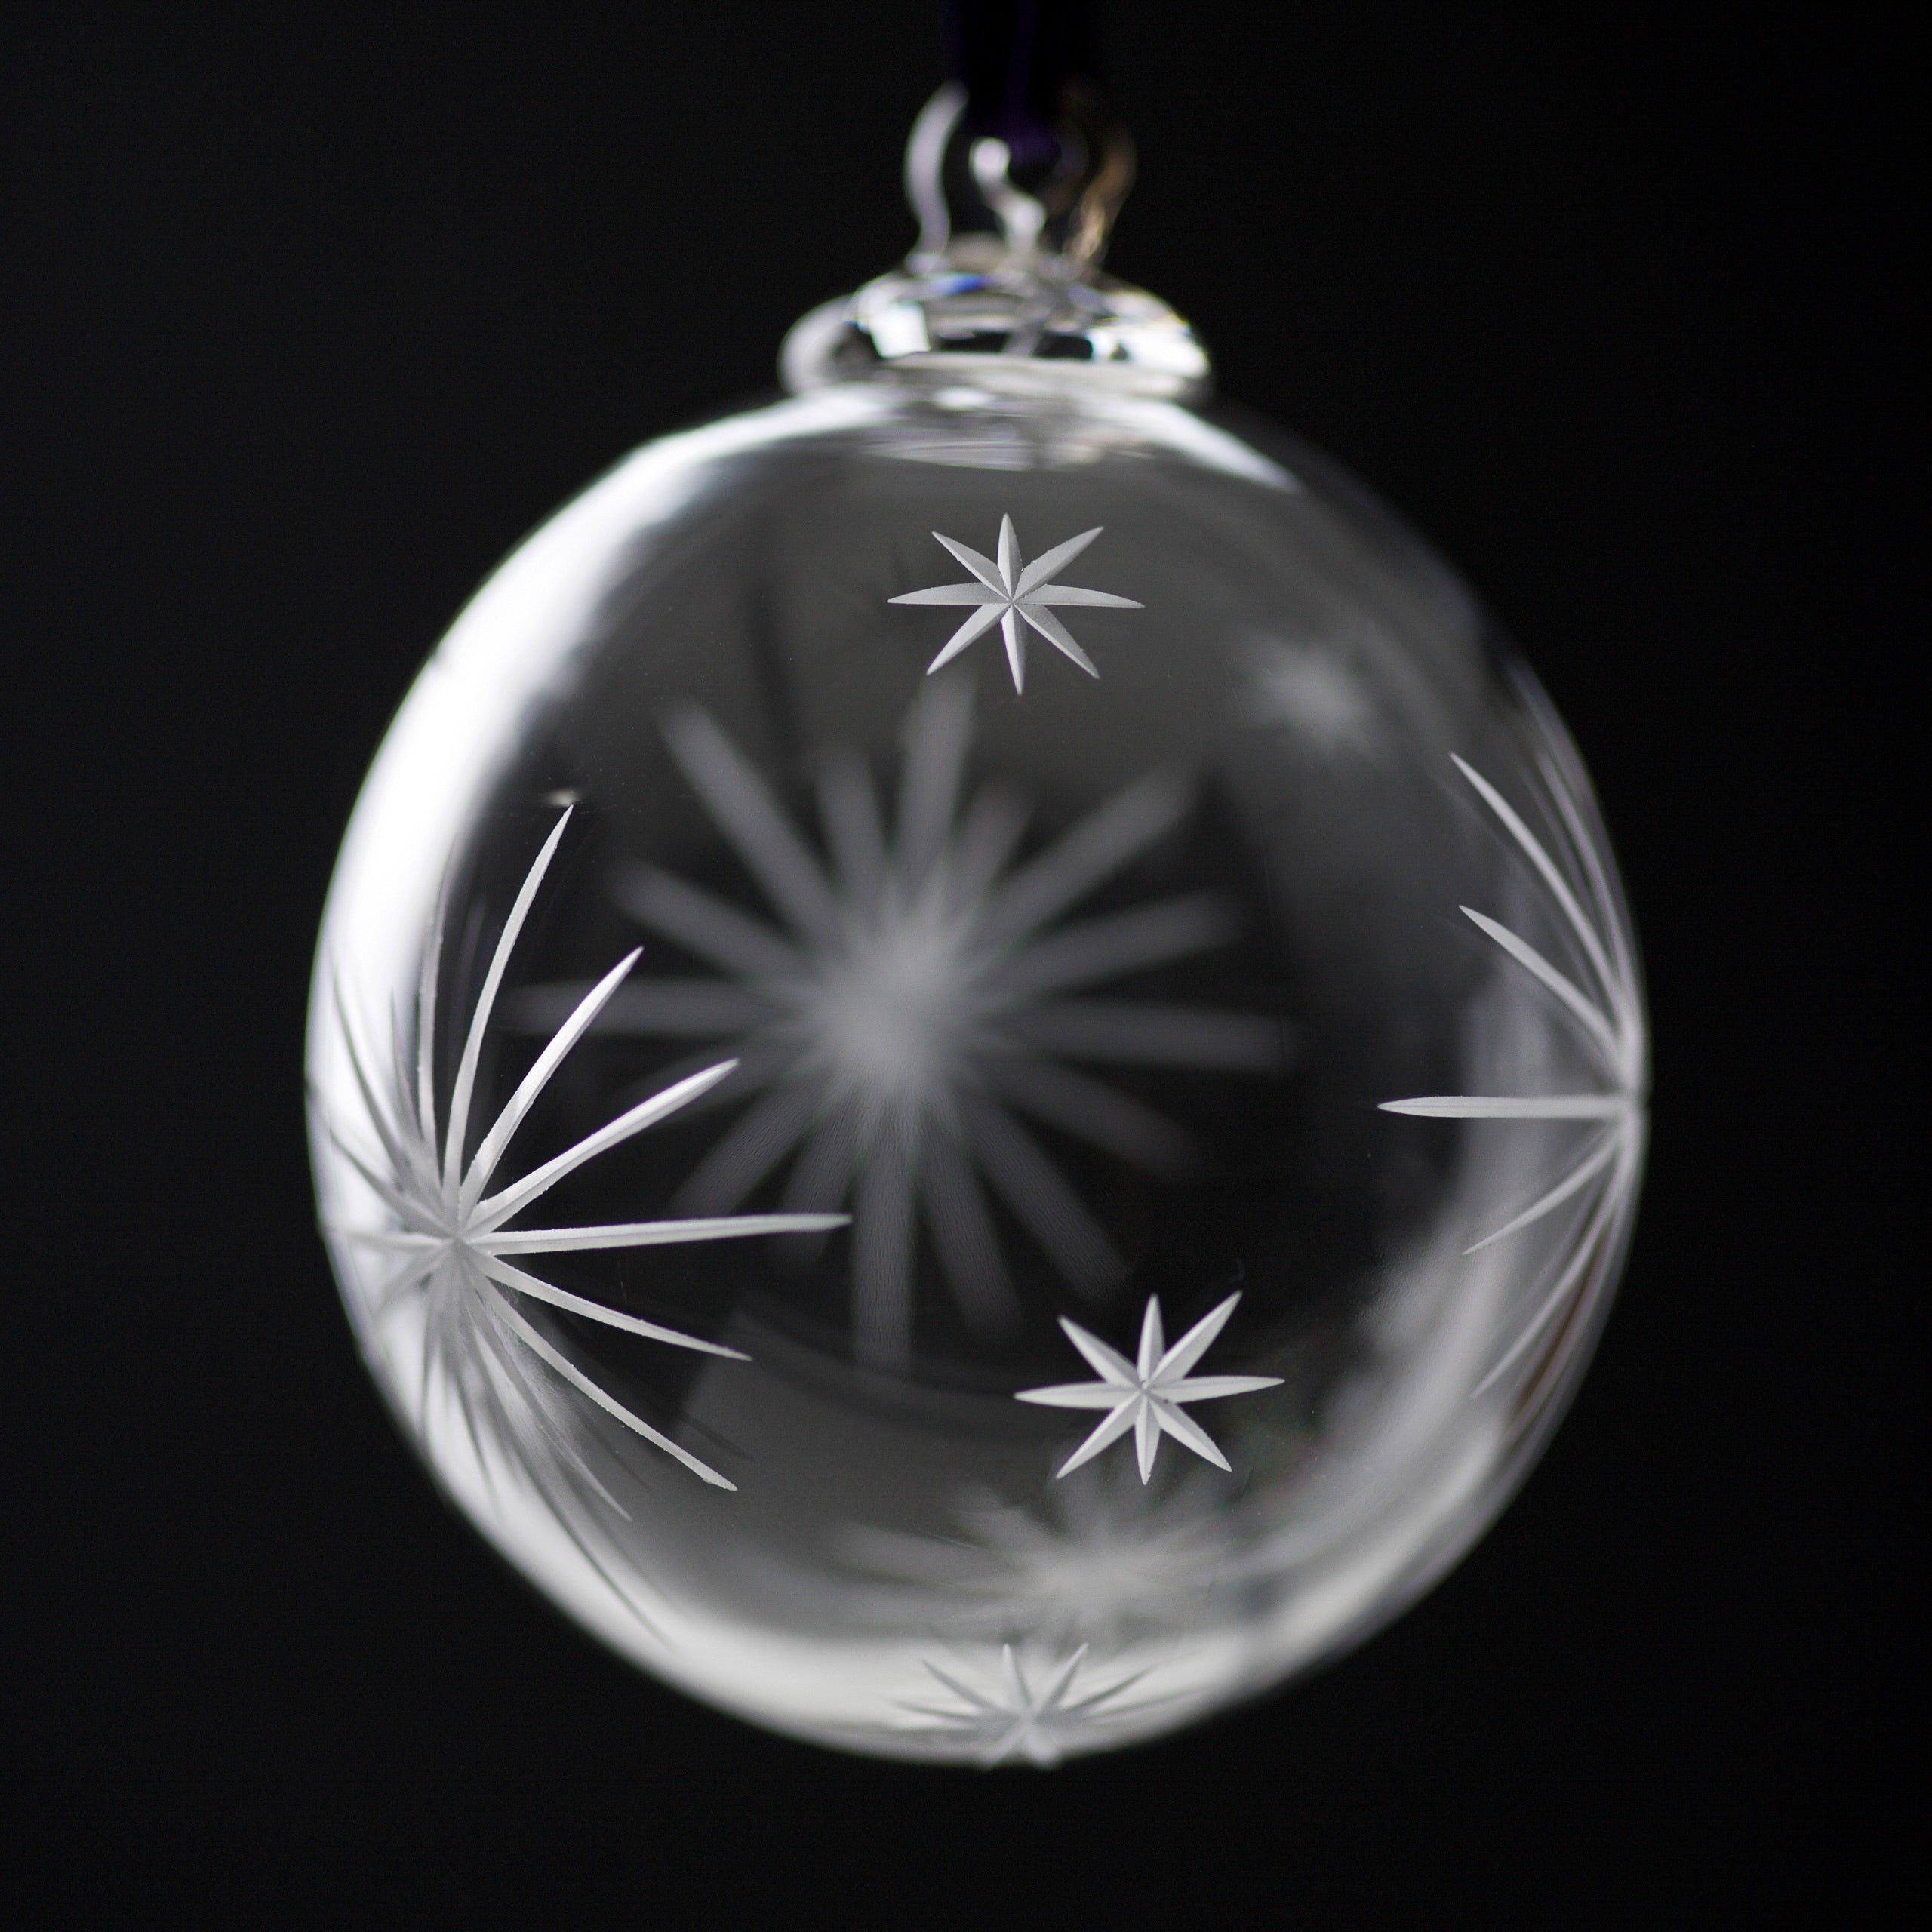 Clear Star Burst Bauble Satin (Slightly Imperfect)-Discontinued-End-of-Line.